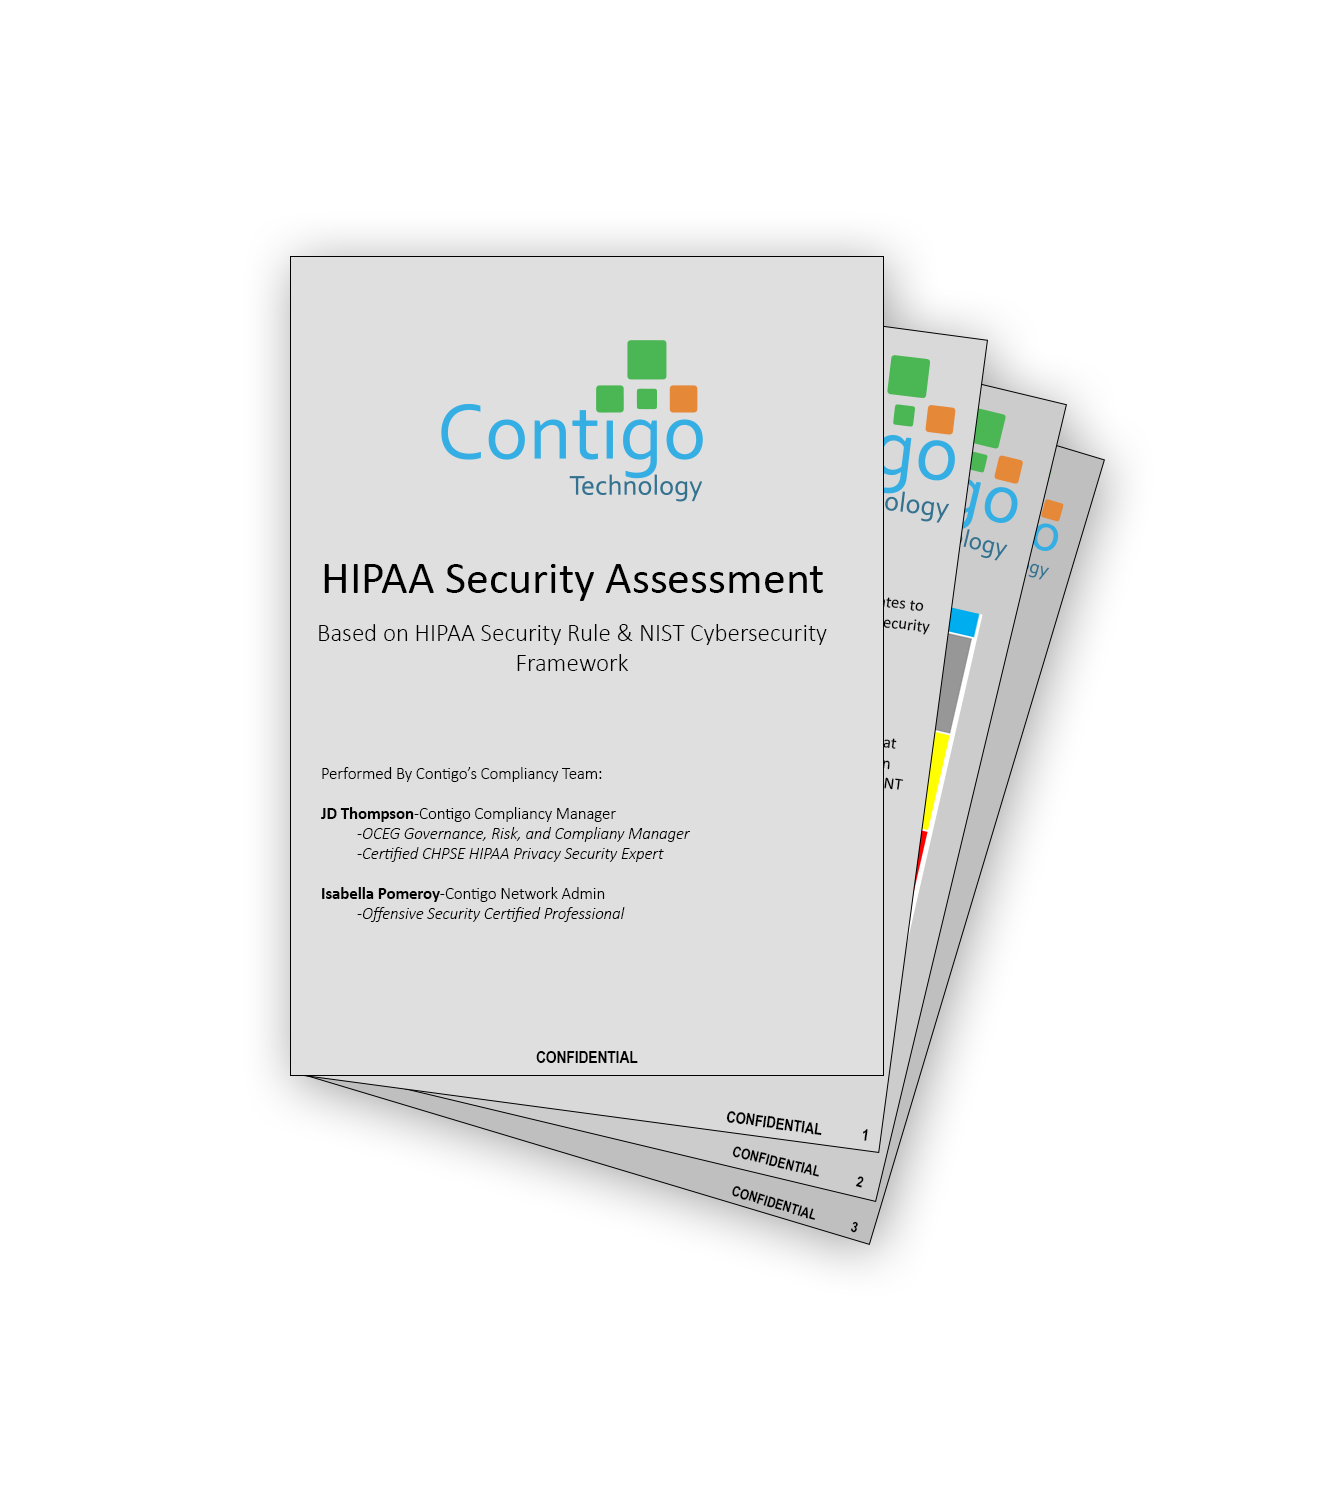 HIPAA security assesment booklet illustration